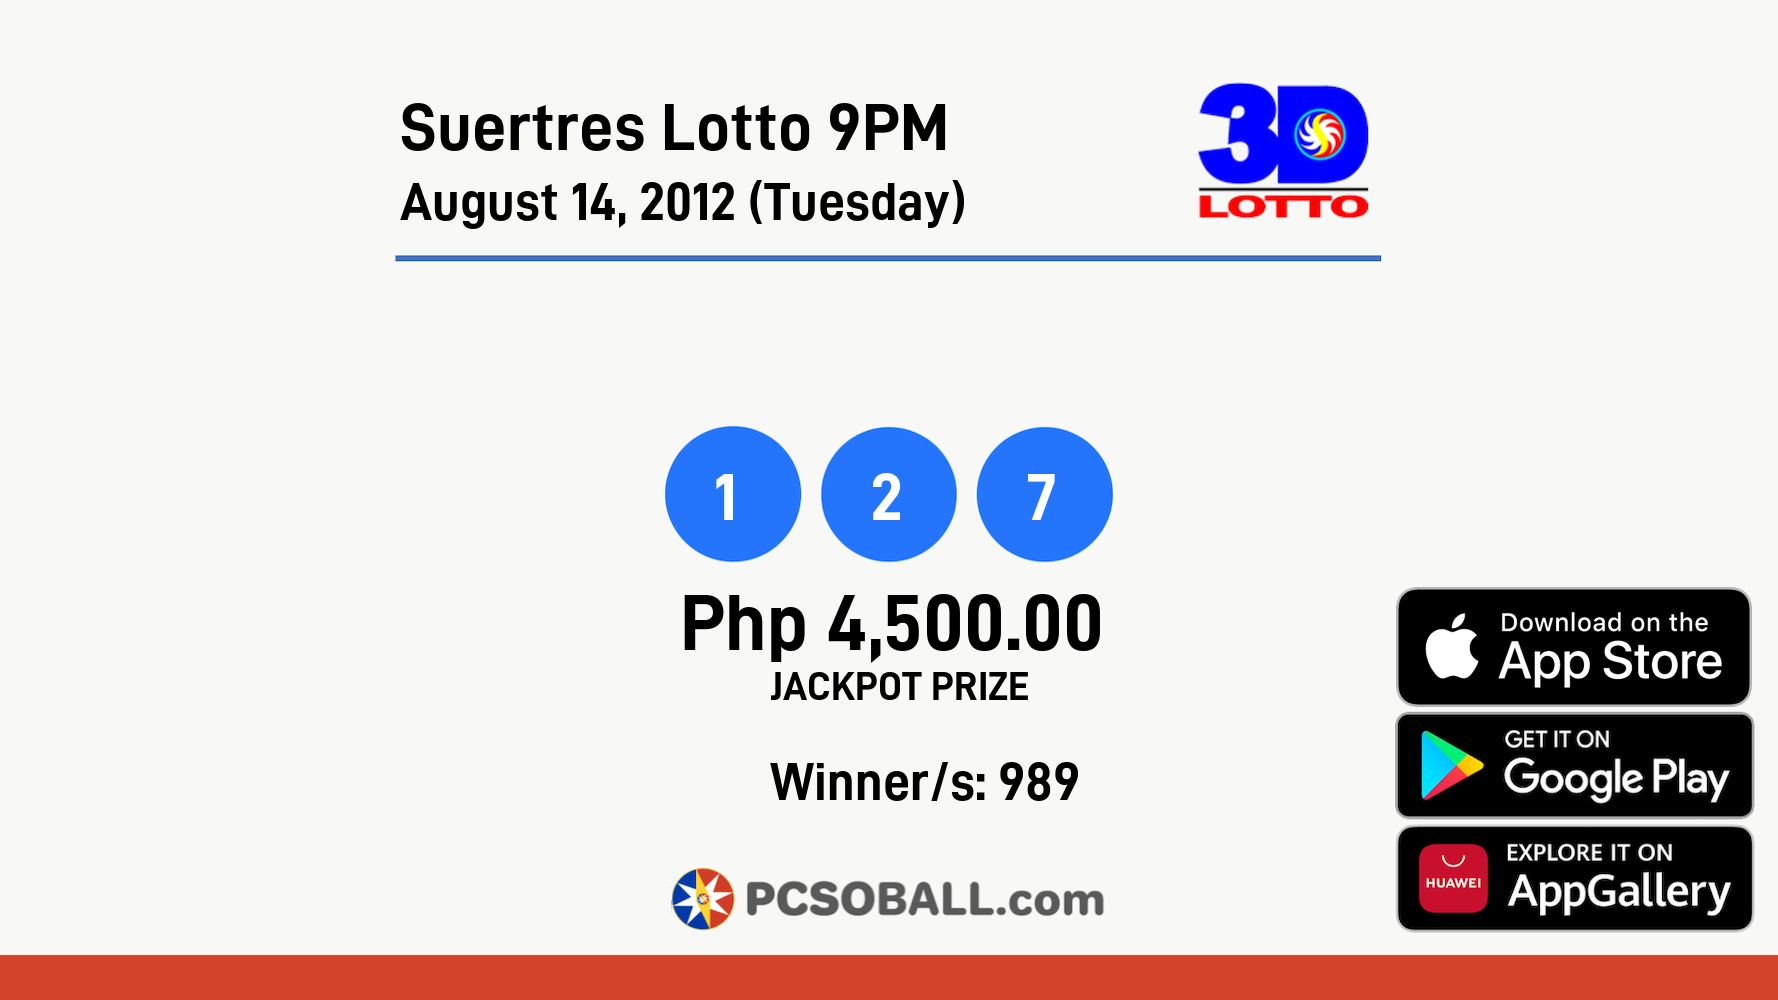 Suertres Lotto 9PM August 14, 2012 (Tuesday) Result